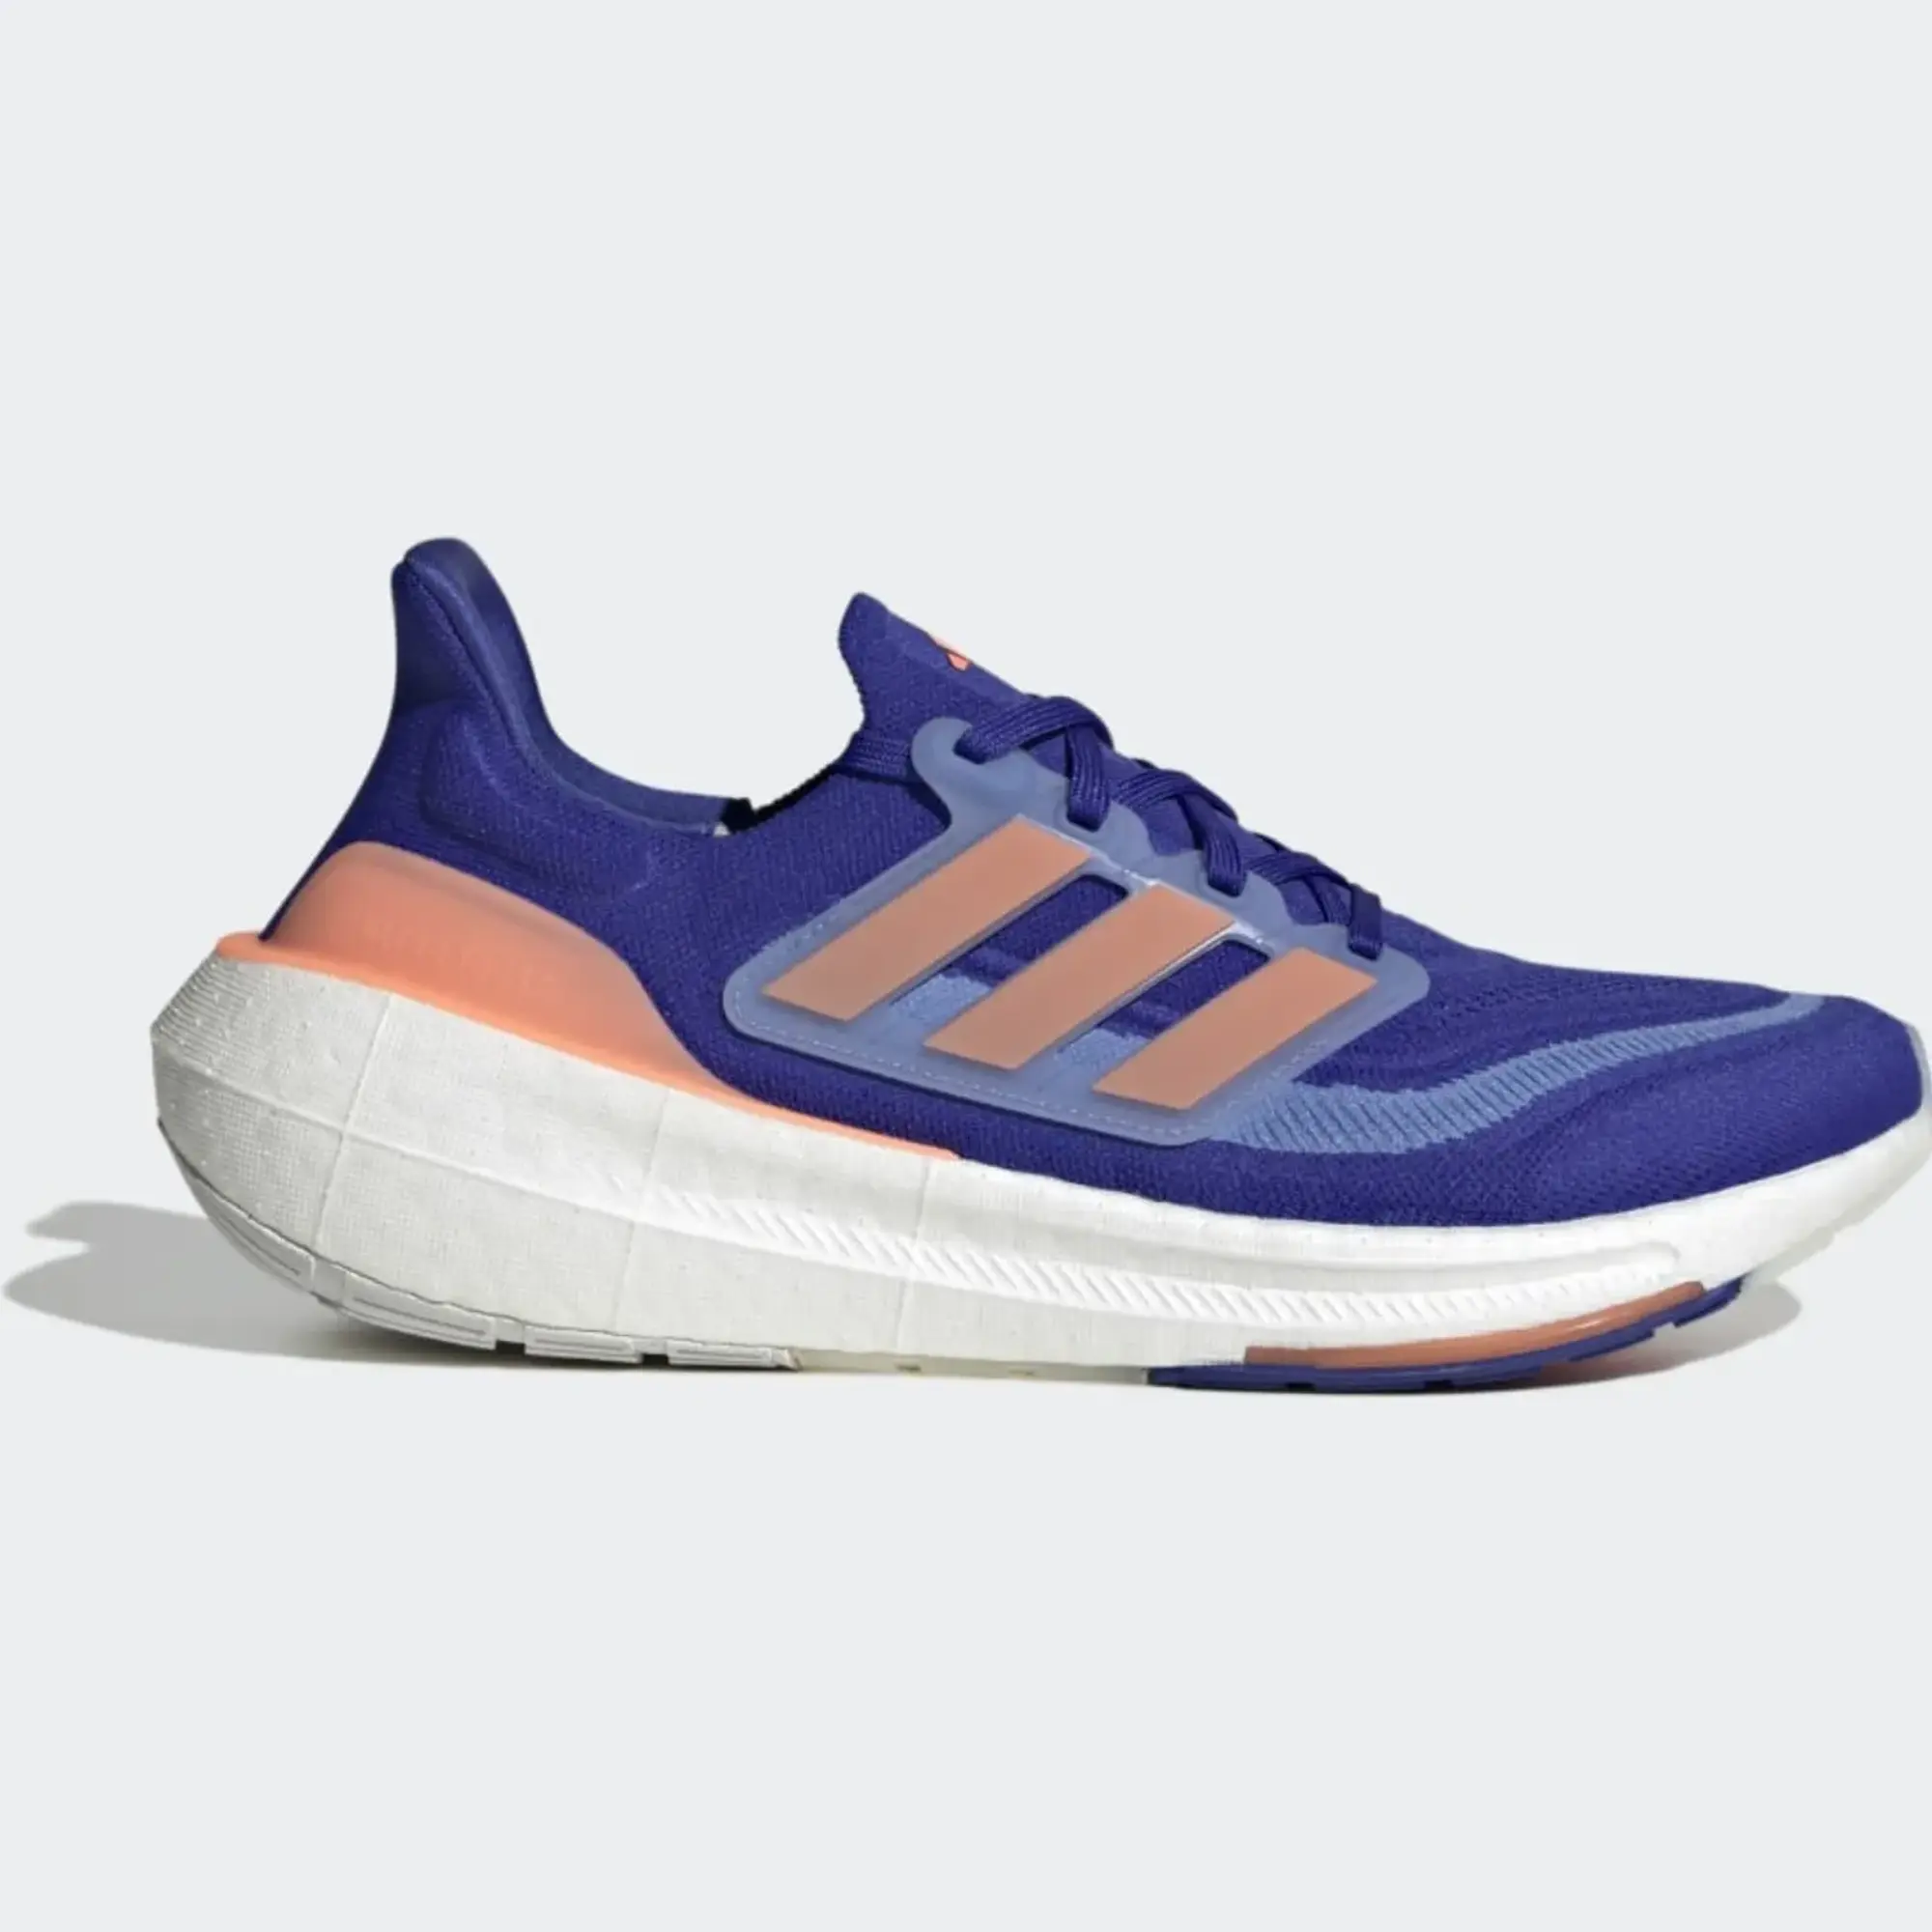 adidas Ultraboost Light Shoes - Lucid Blue / Coral Fusion / Blue Fusion